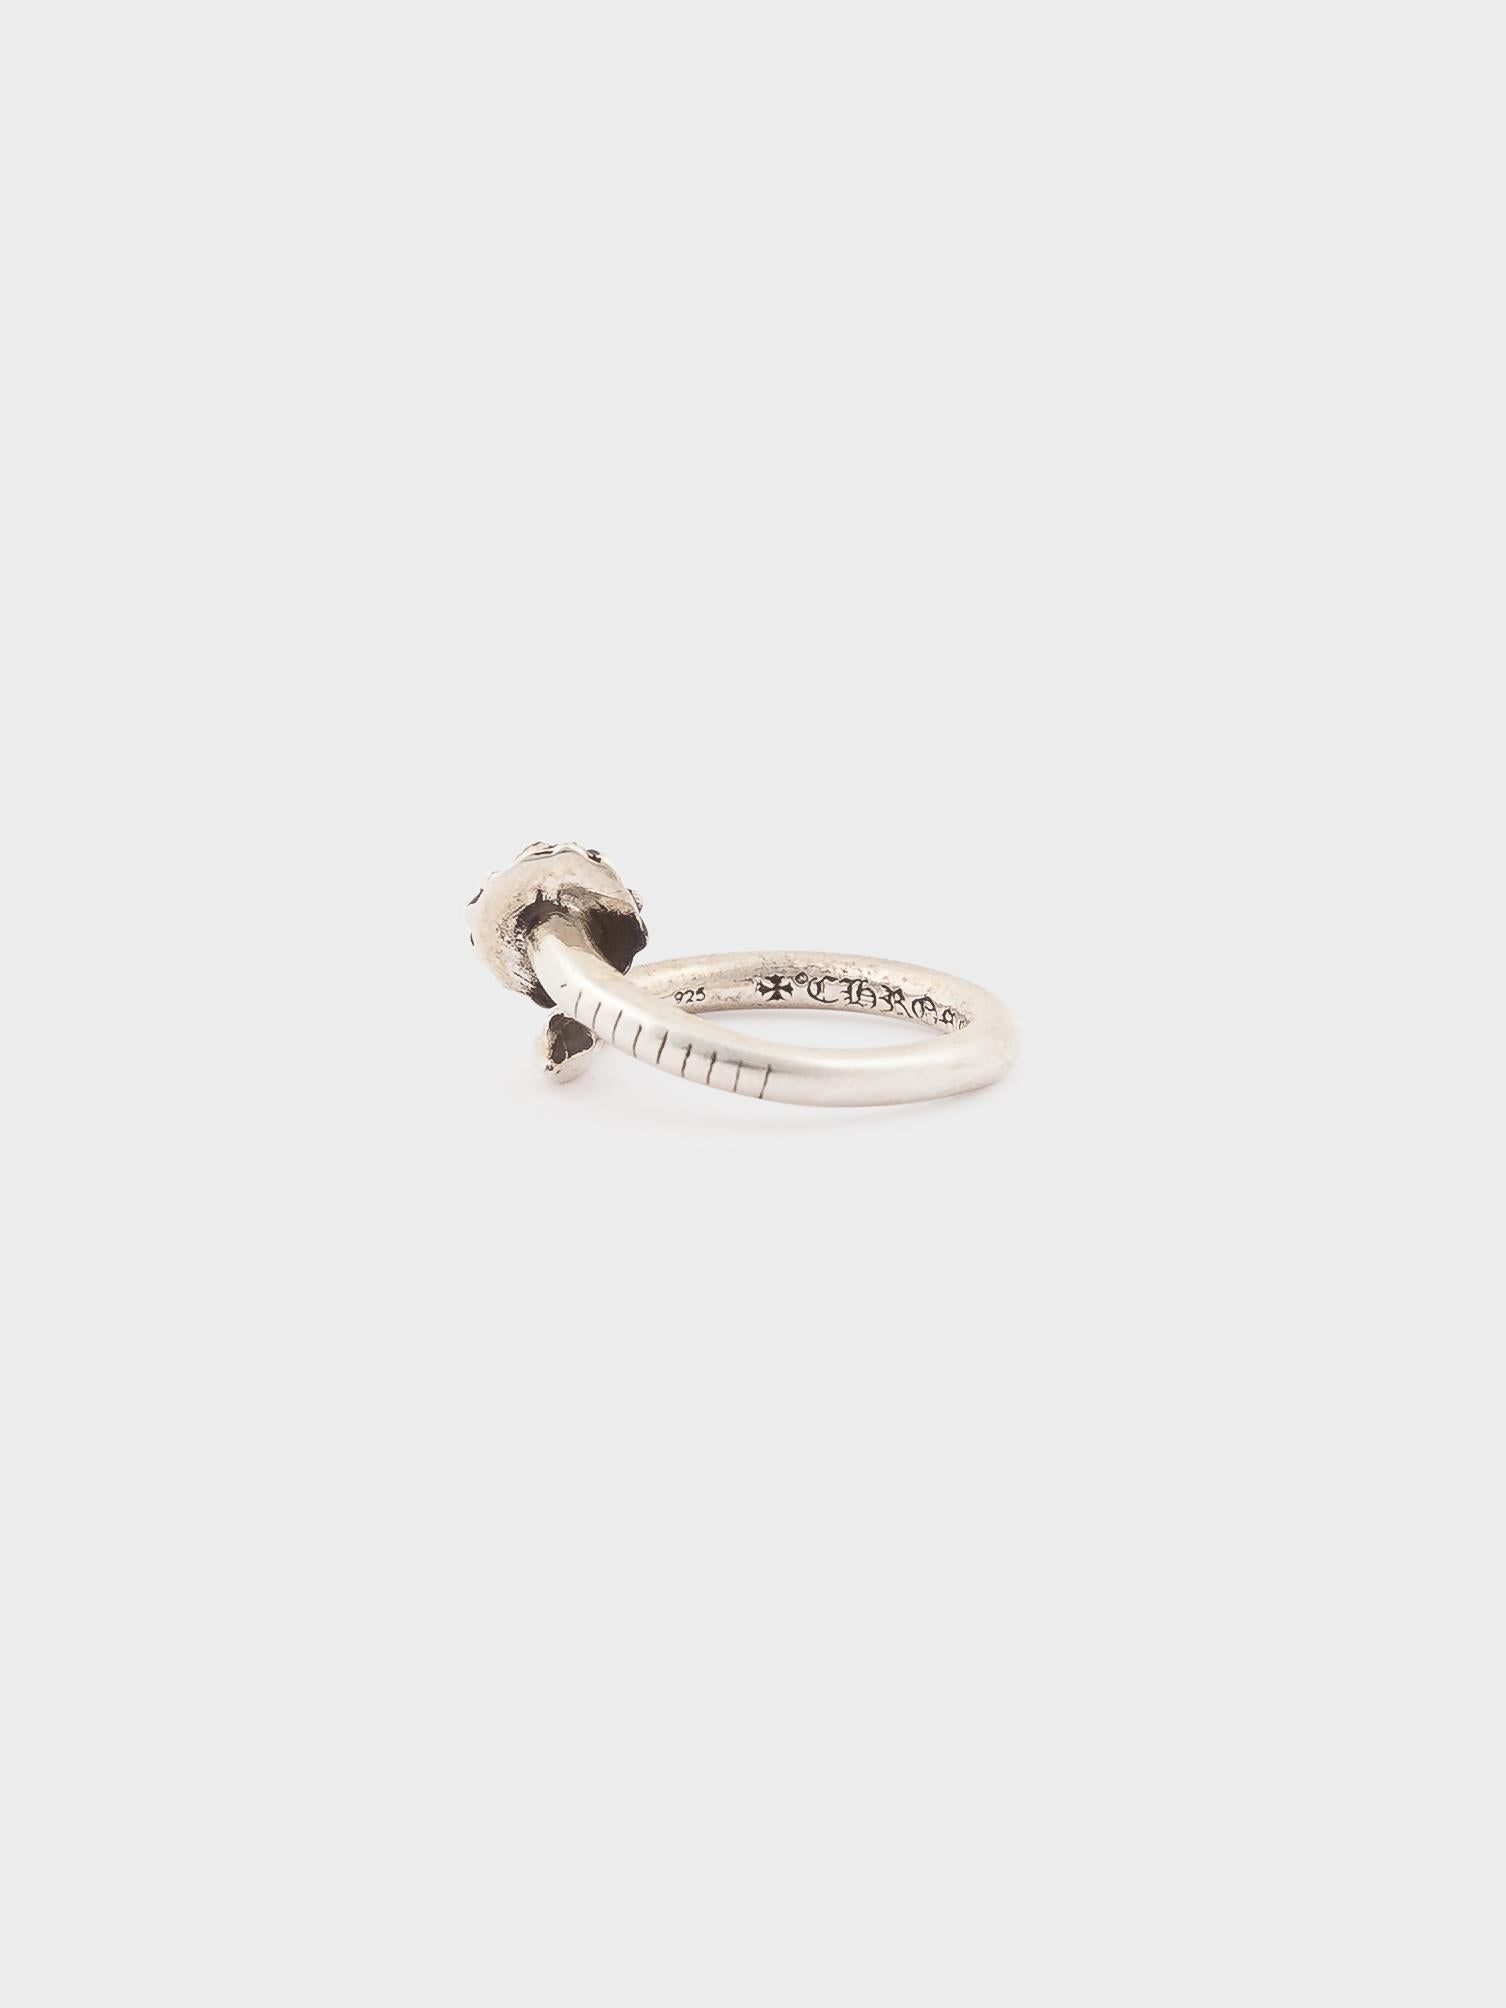 ✓ Authenticated

Our trained in-house authentication experts have reviewed this item to ensure that it is original. We guarantee its authenticity.

Here is a gently used Nail Ring from Chrome Hearts.

Condition: Like new 

